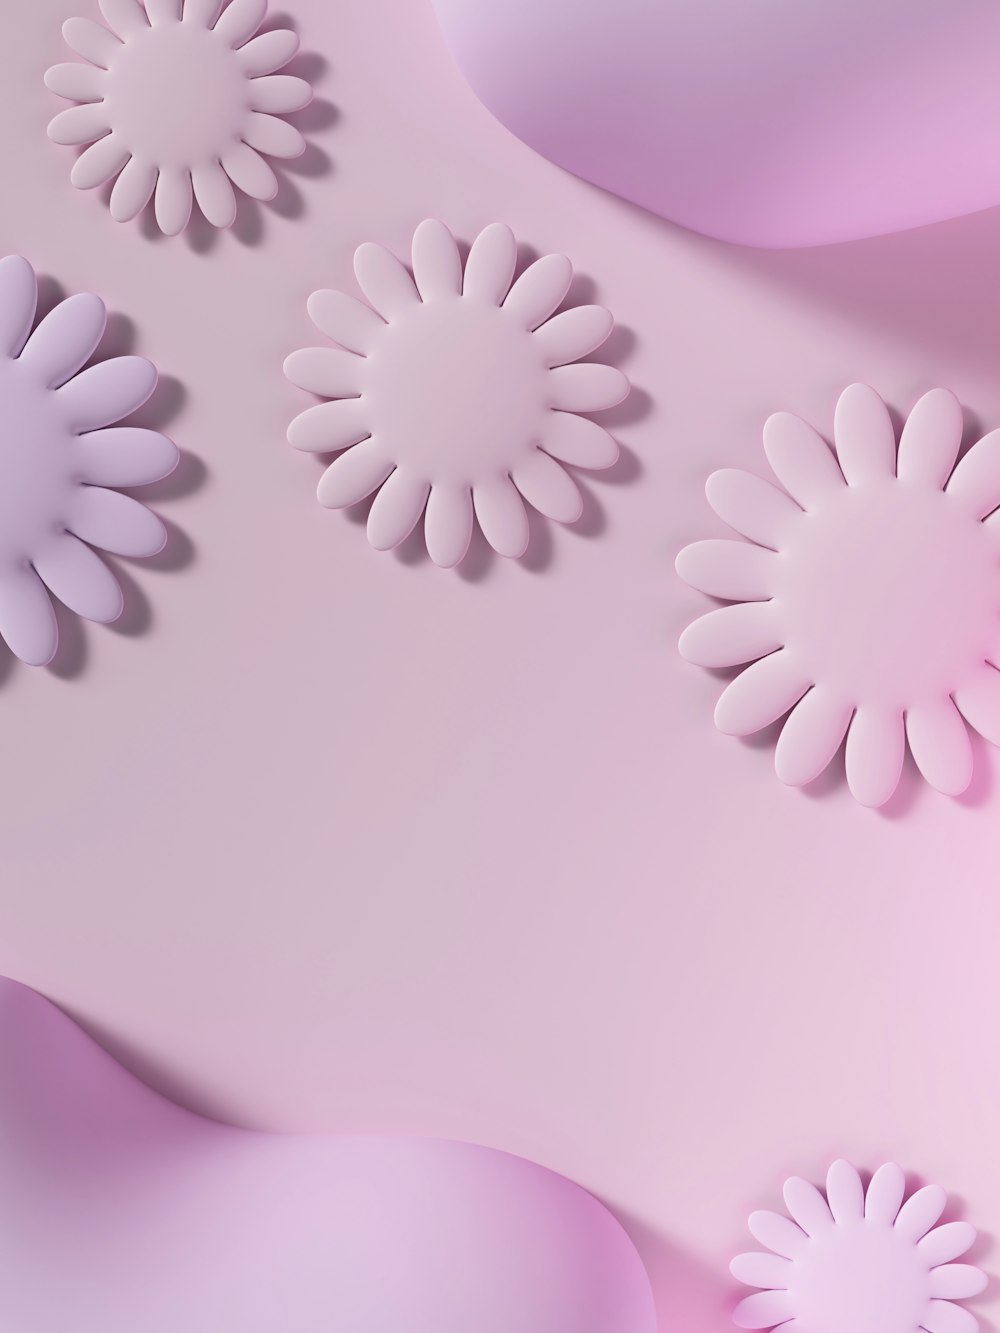 a close up of paper flowers on a pink background